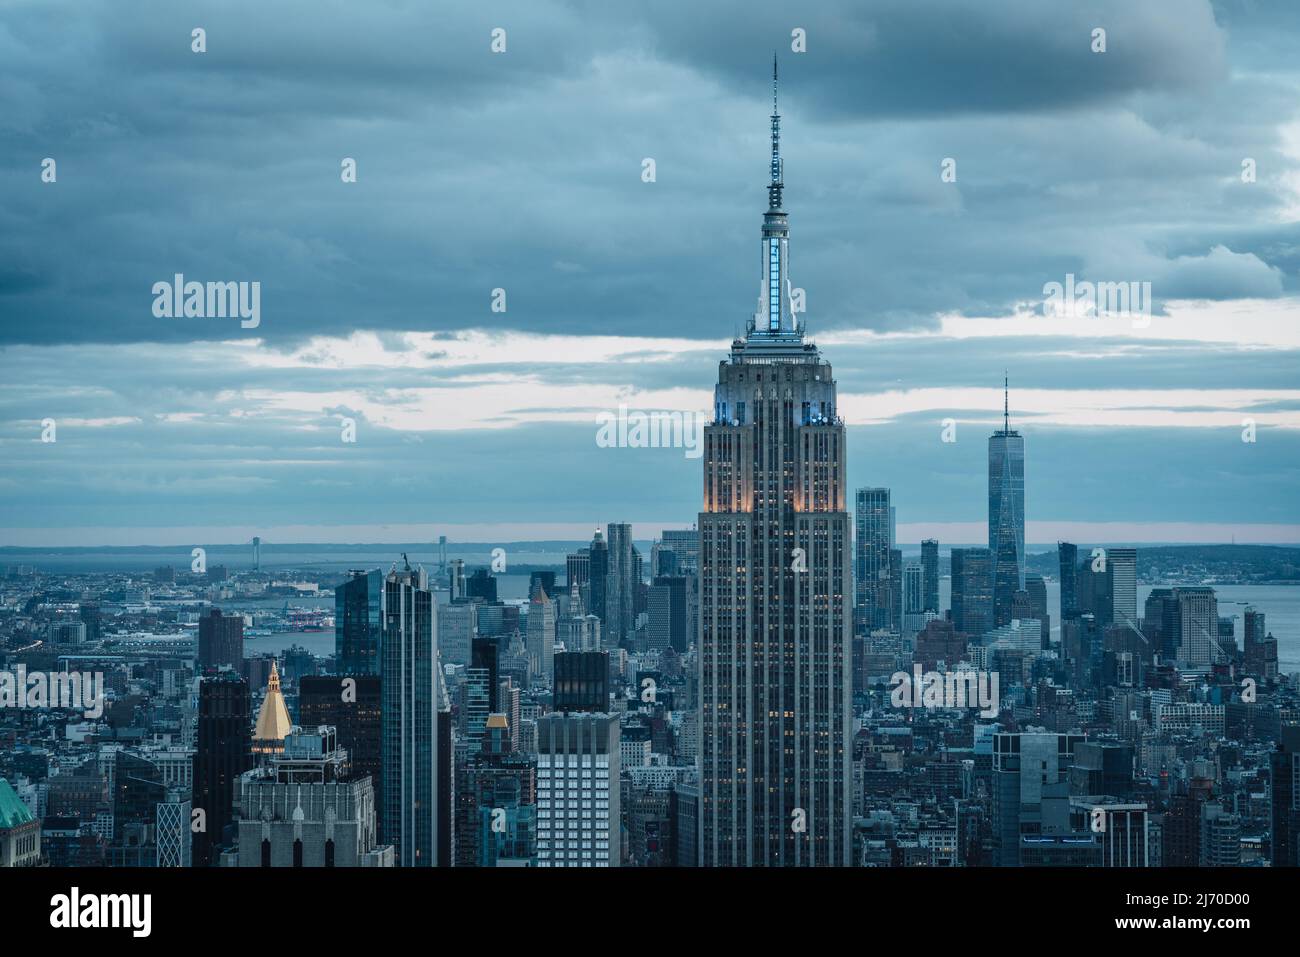 New York City skyline at evening, cloudy day, high point of view. USA Stock Photo